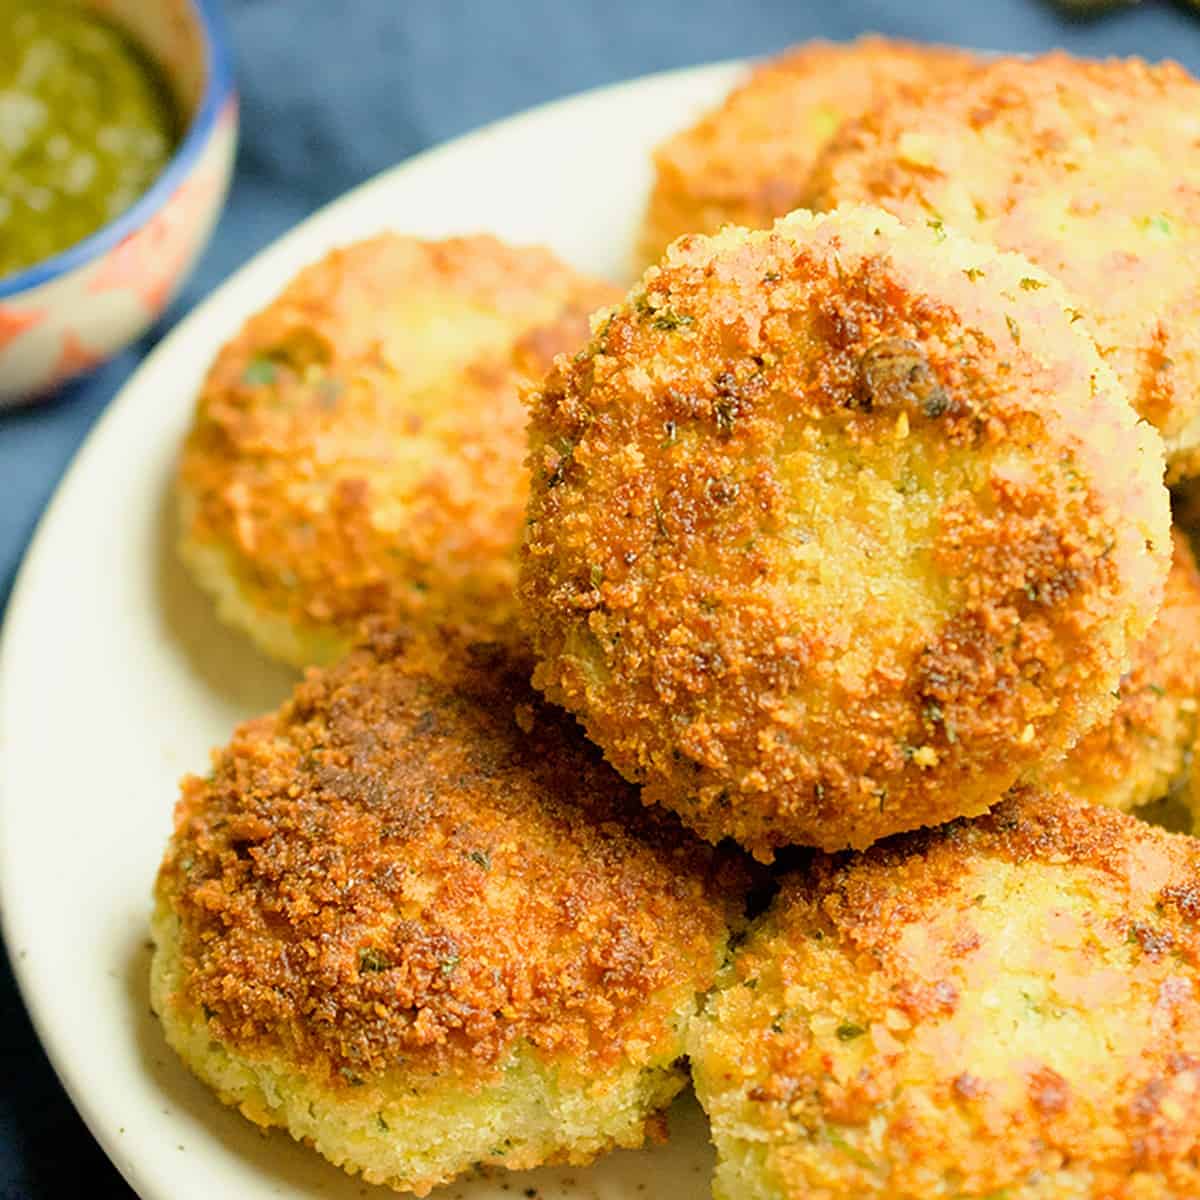 Potato cutlets with a crispy outside and fluffy inside are plated and ready to eat.